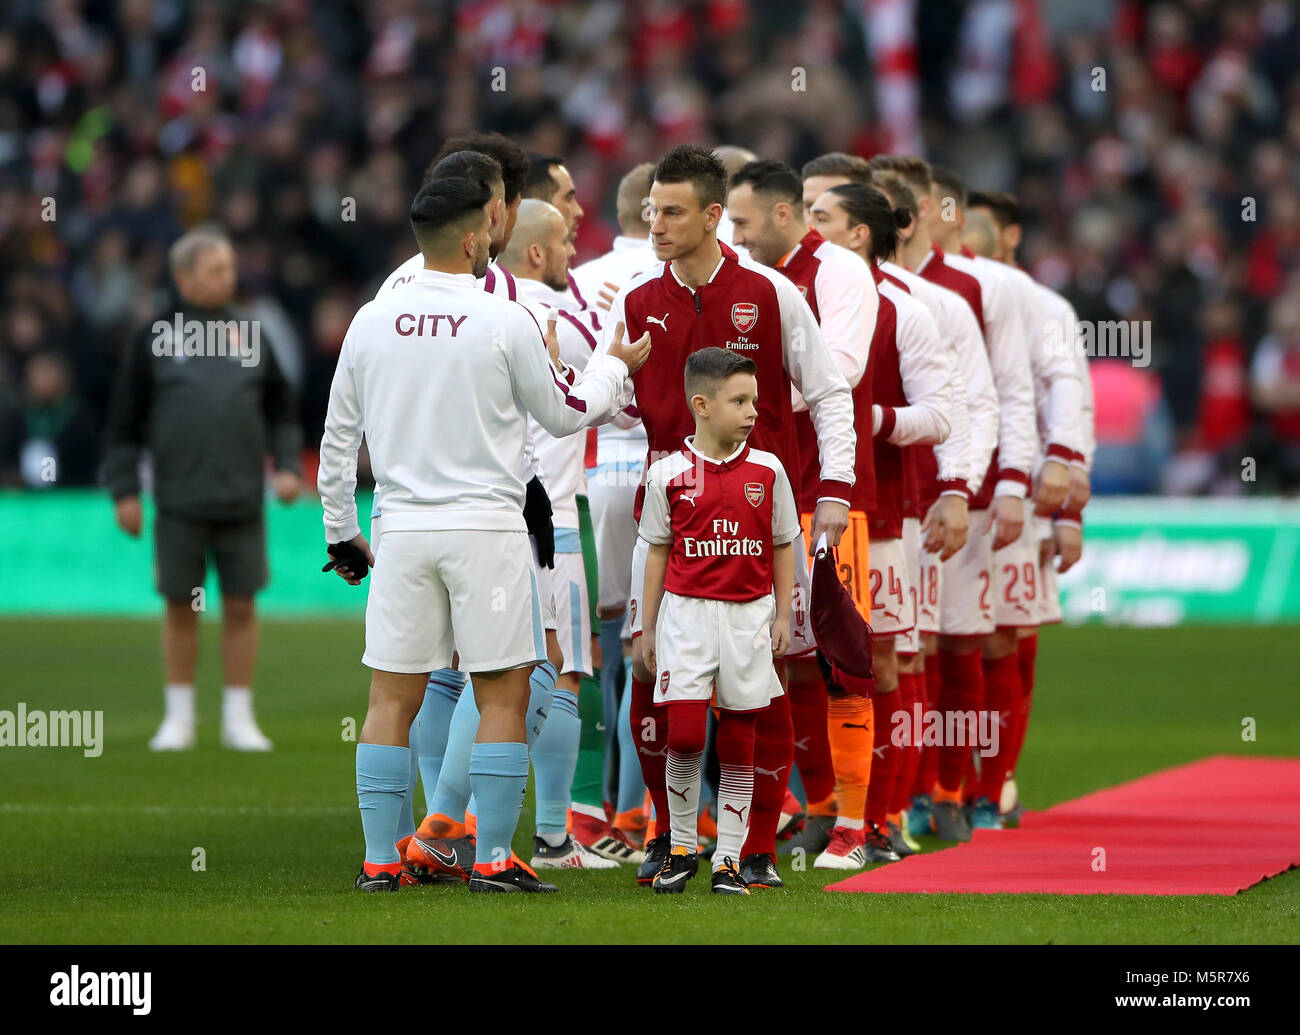 The two team's shake hands before the Carabao Cup Final at Wembley Stadium, London. PRESS ASSOCIATION Photo. Picture date: Sunday February 25, 2018. See PA story SOCCER Final. Photo credit should read: Nick Potts/PA Wire. RESTRICTIONS: No use with unauthorised audio, video, data, fixture lists, club/league logos or 'live' services. Online in-match use limited to 75 images, no video emulation. No use in betting, games or single club/league/player publications. Stock Photo